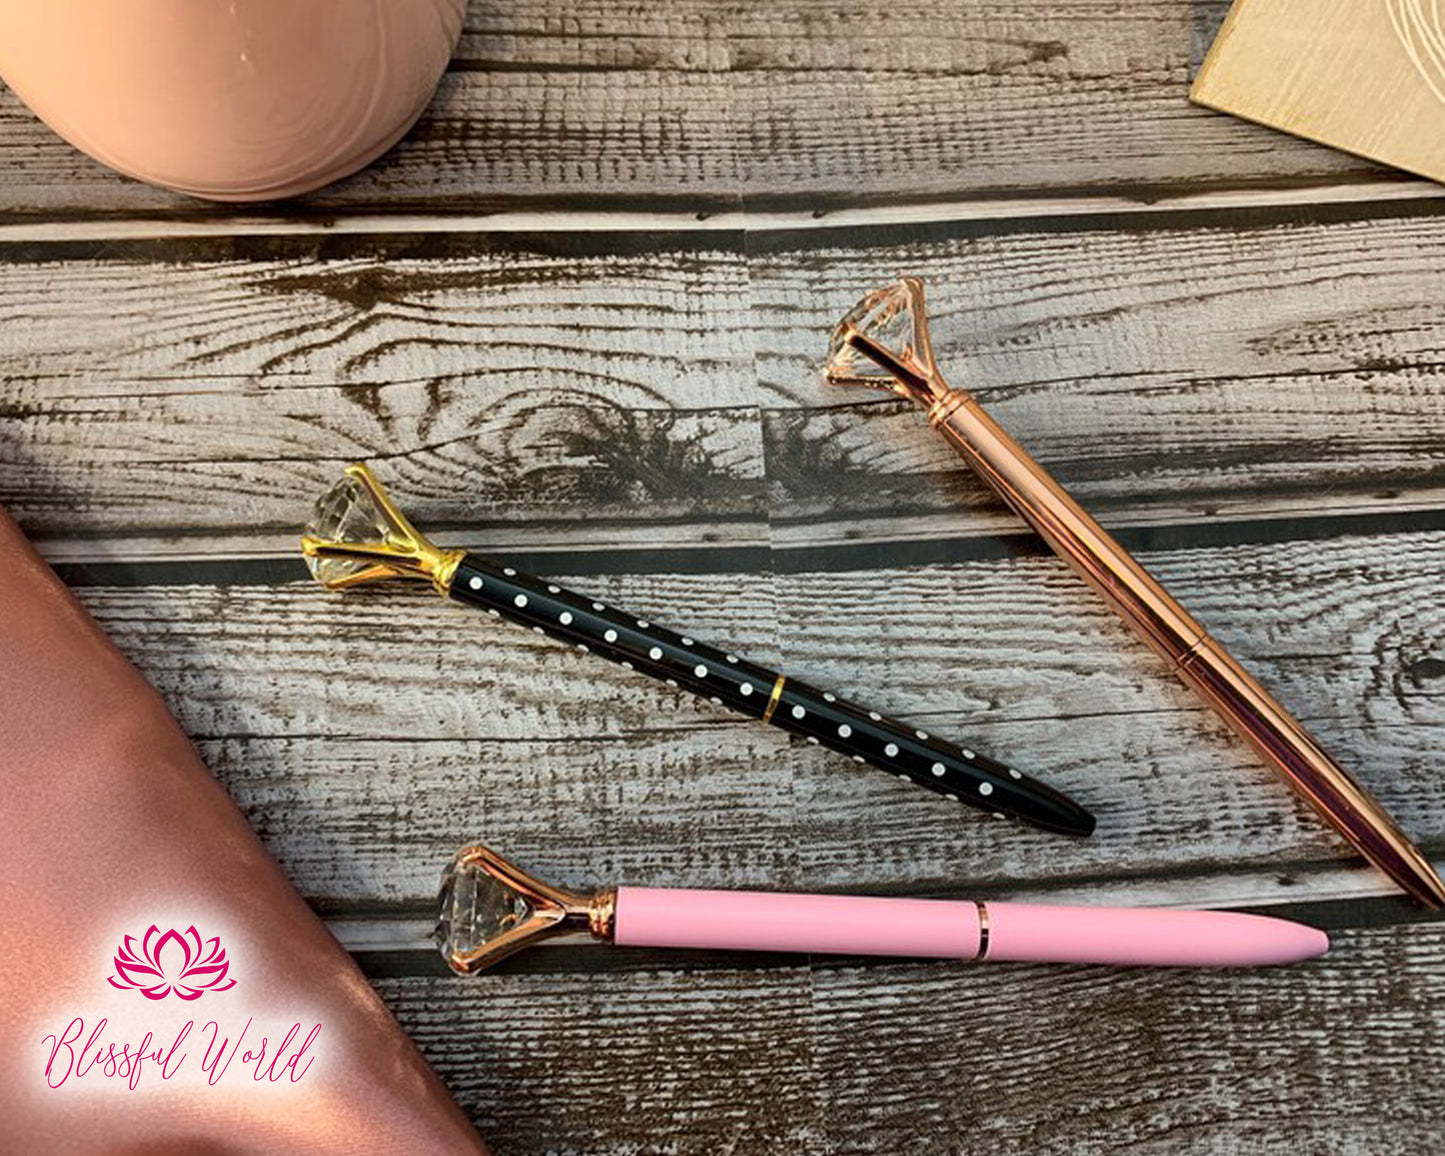 Wedding Favors for Guest | Custom Diamond Pen | Bridal Shower Favors | Party Favors | Personalized Gifts | Bridesmaid Gifts | Engraved Pen